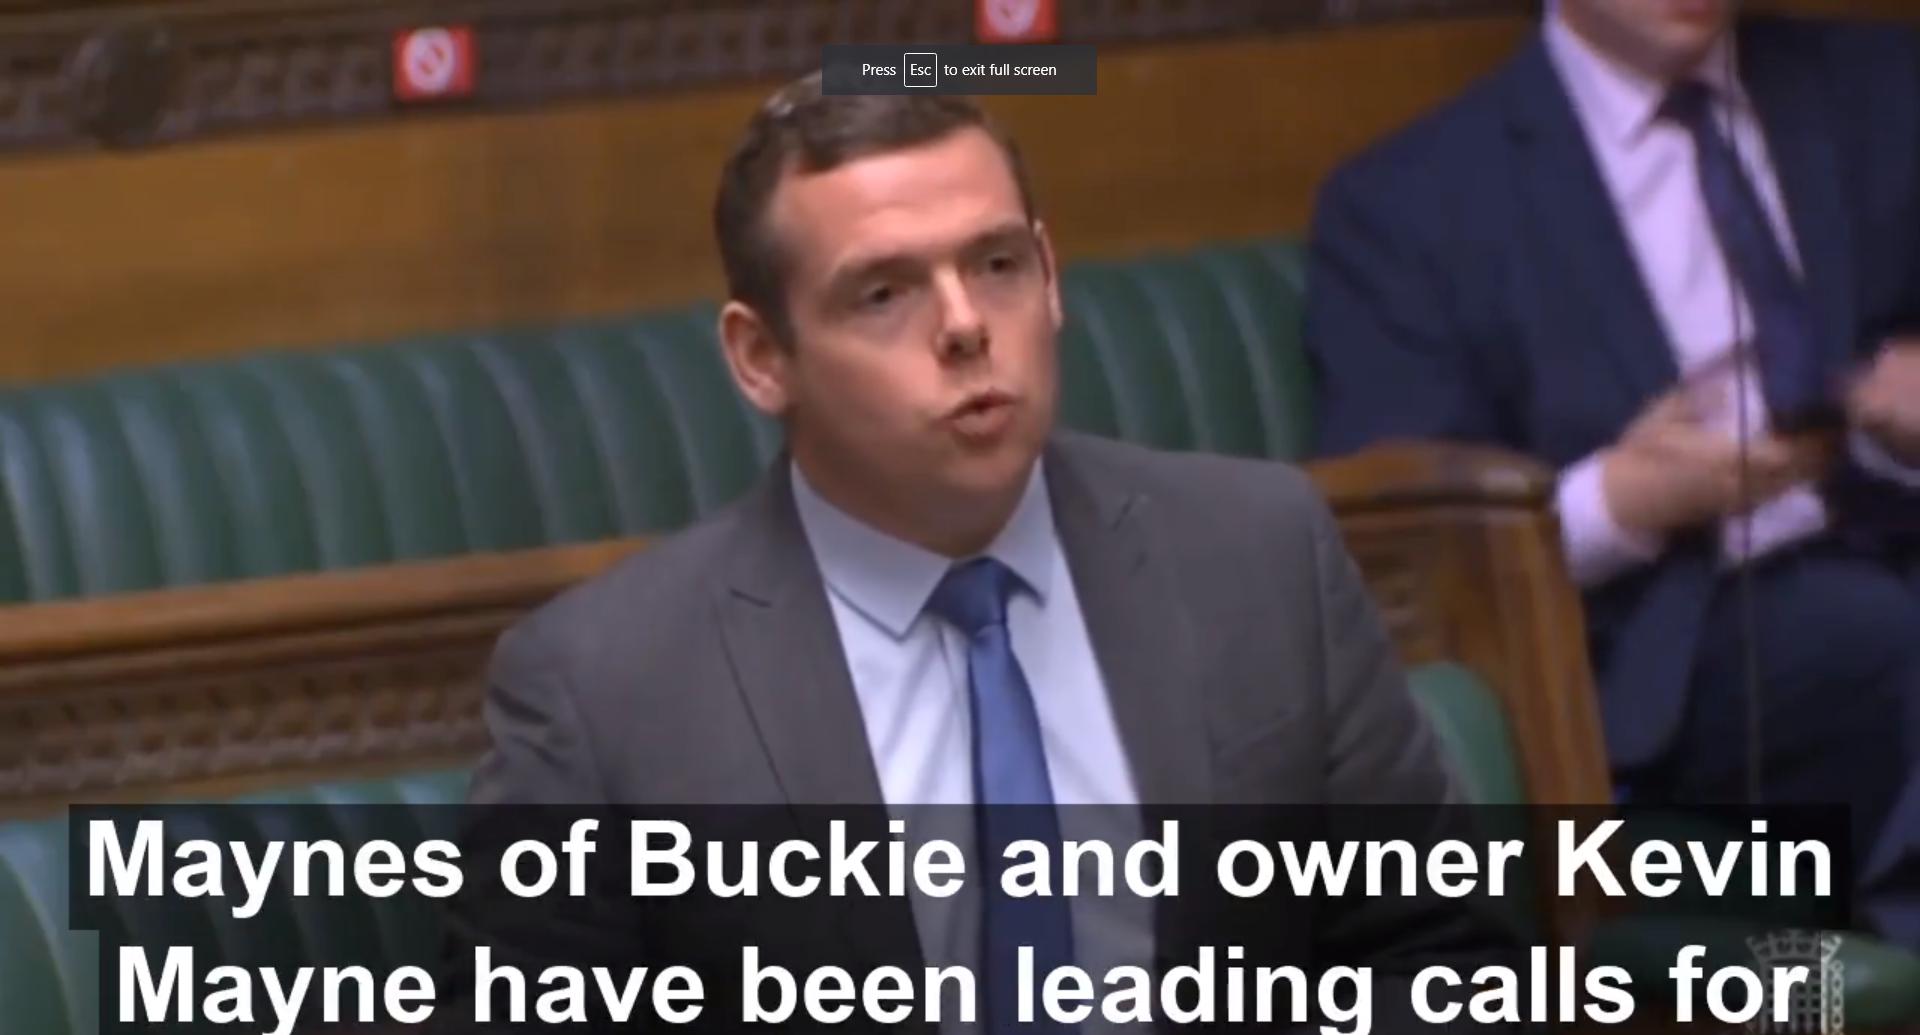 Video: MP makes case for coaches at Commons